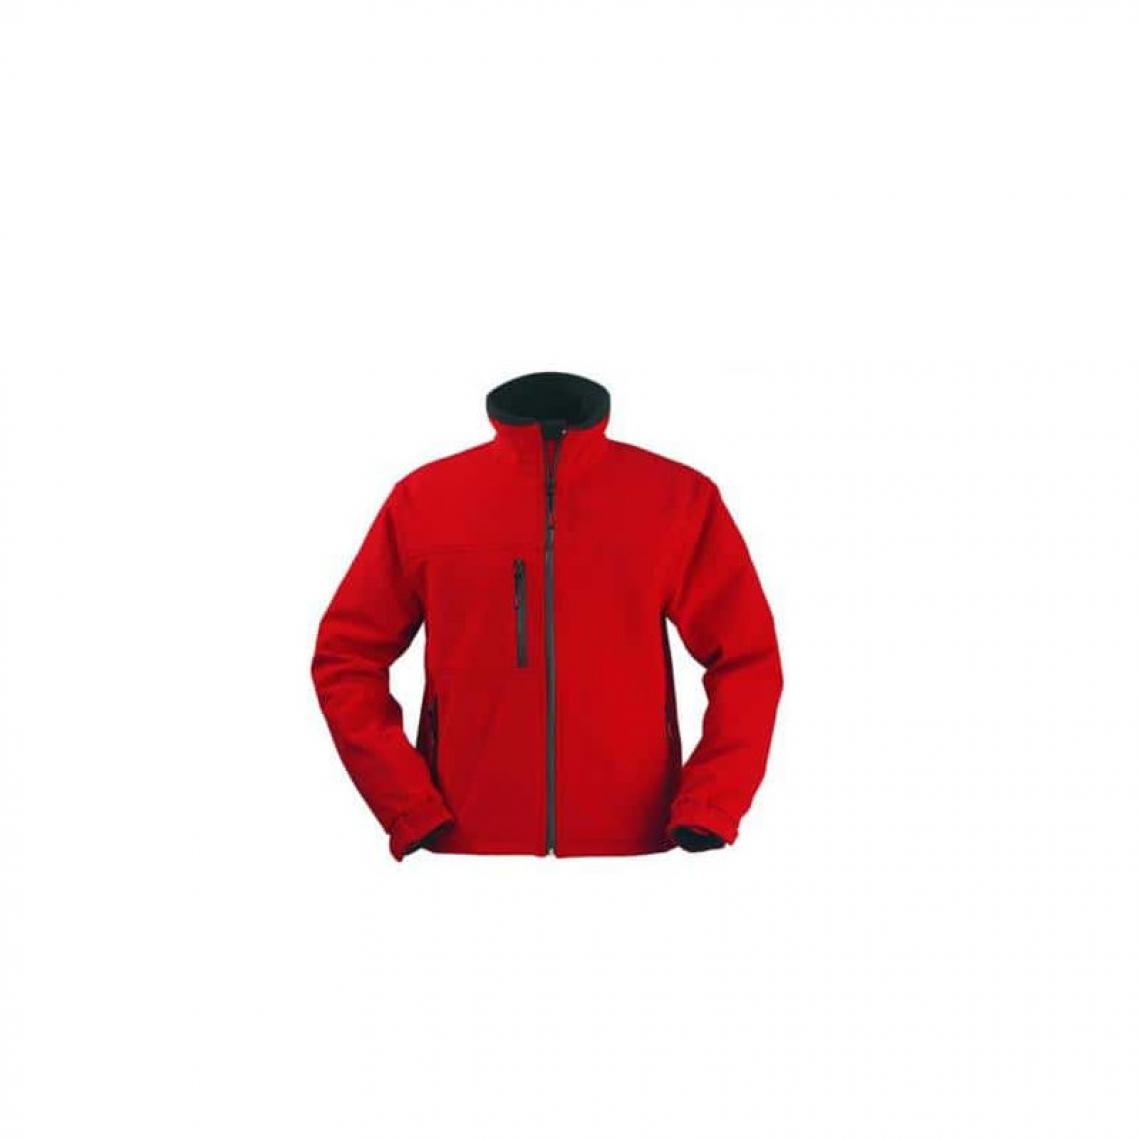 Coverguard - Veste Softshell rouge Yang Coverguard taille S - Protections corps